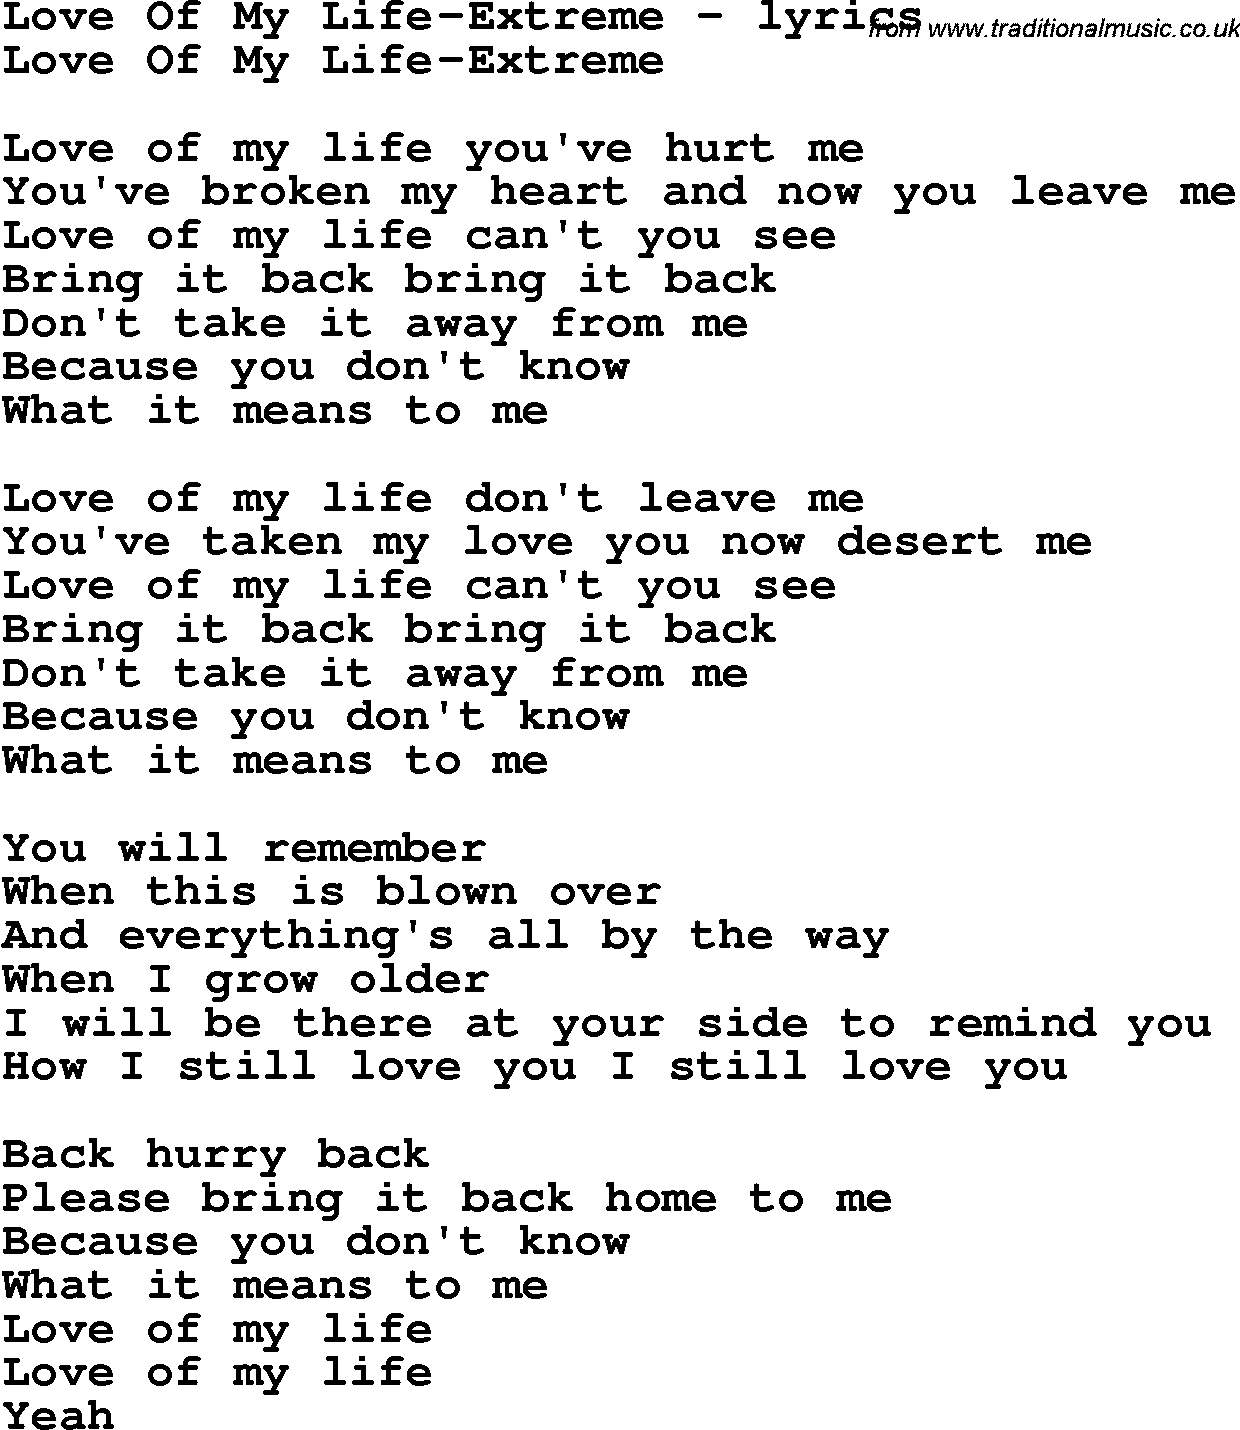 Love Song Lyrics for: Love Of My Life-Extreme